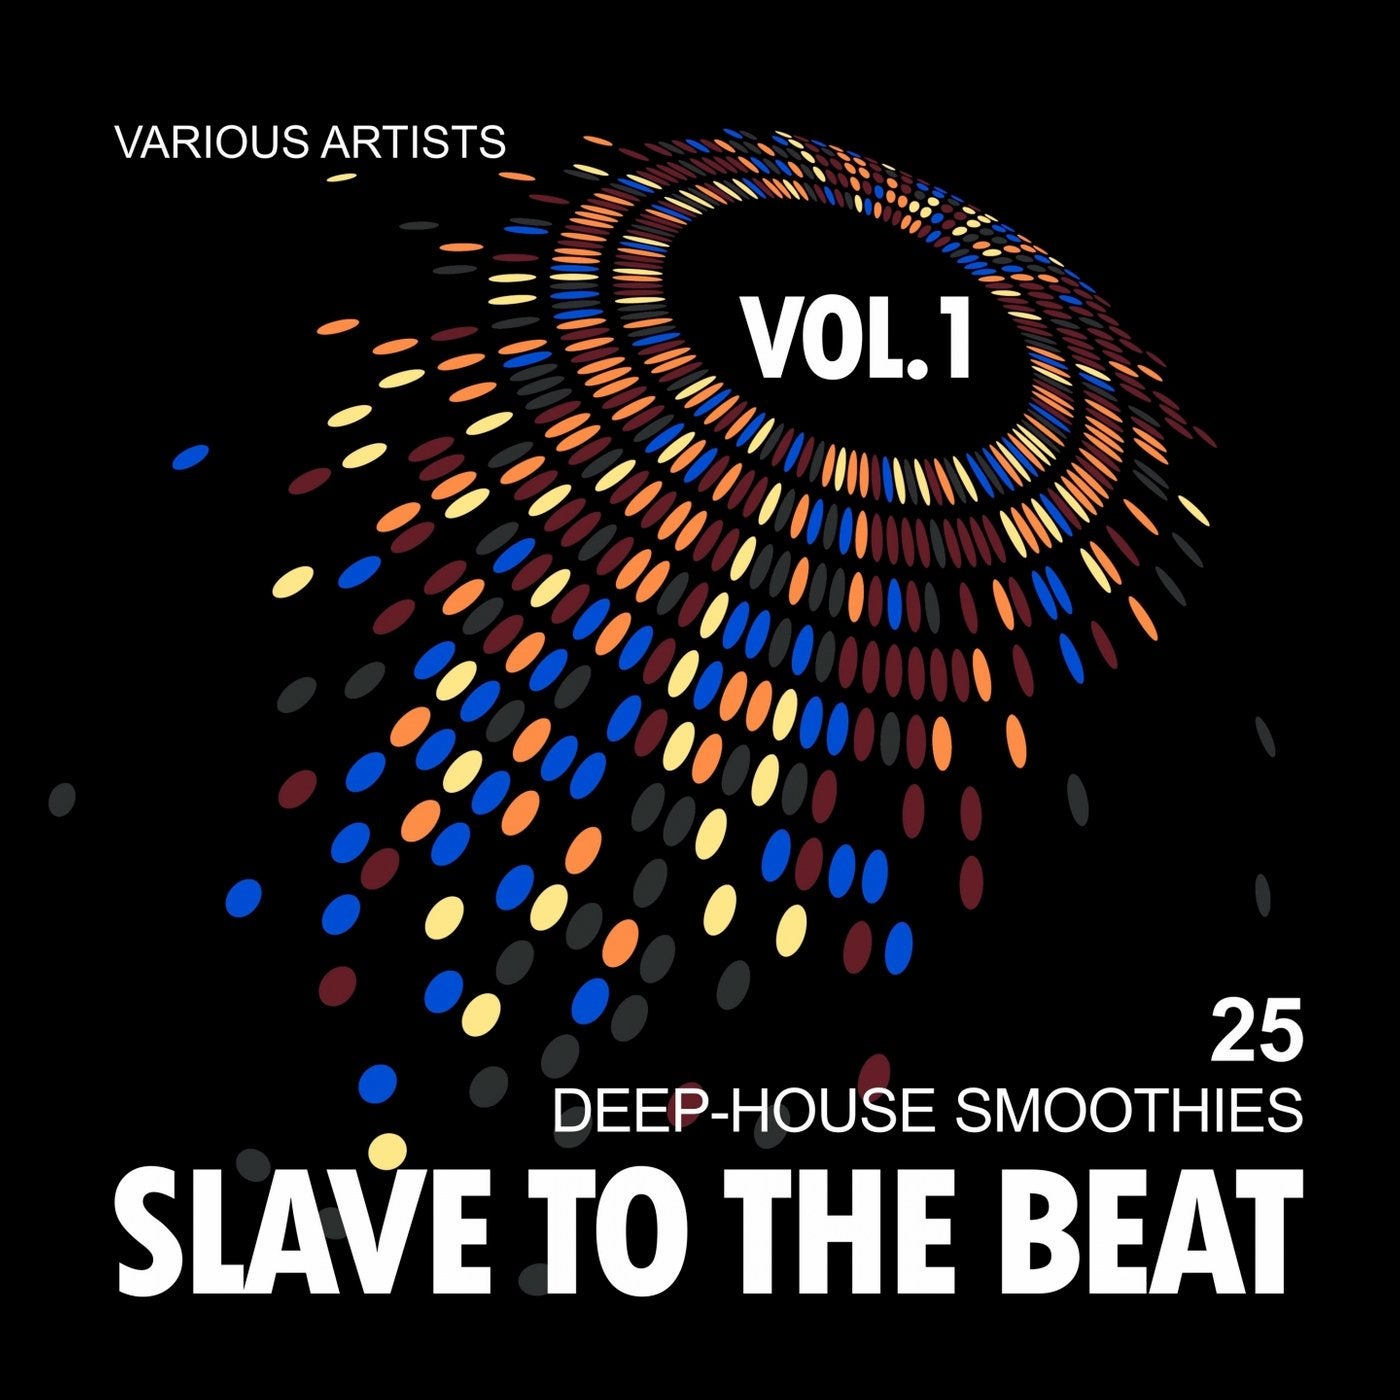 Slave To The Beat (25 Deep-House Smoothies), Vol. 1